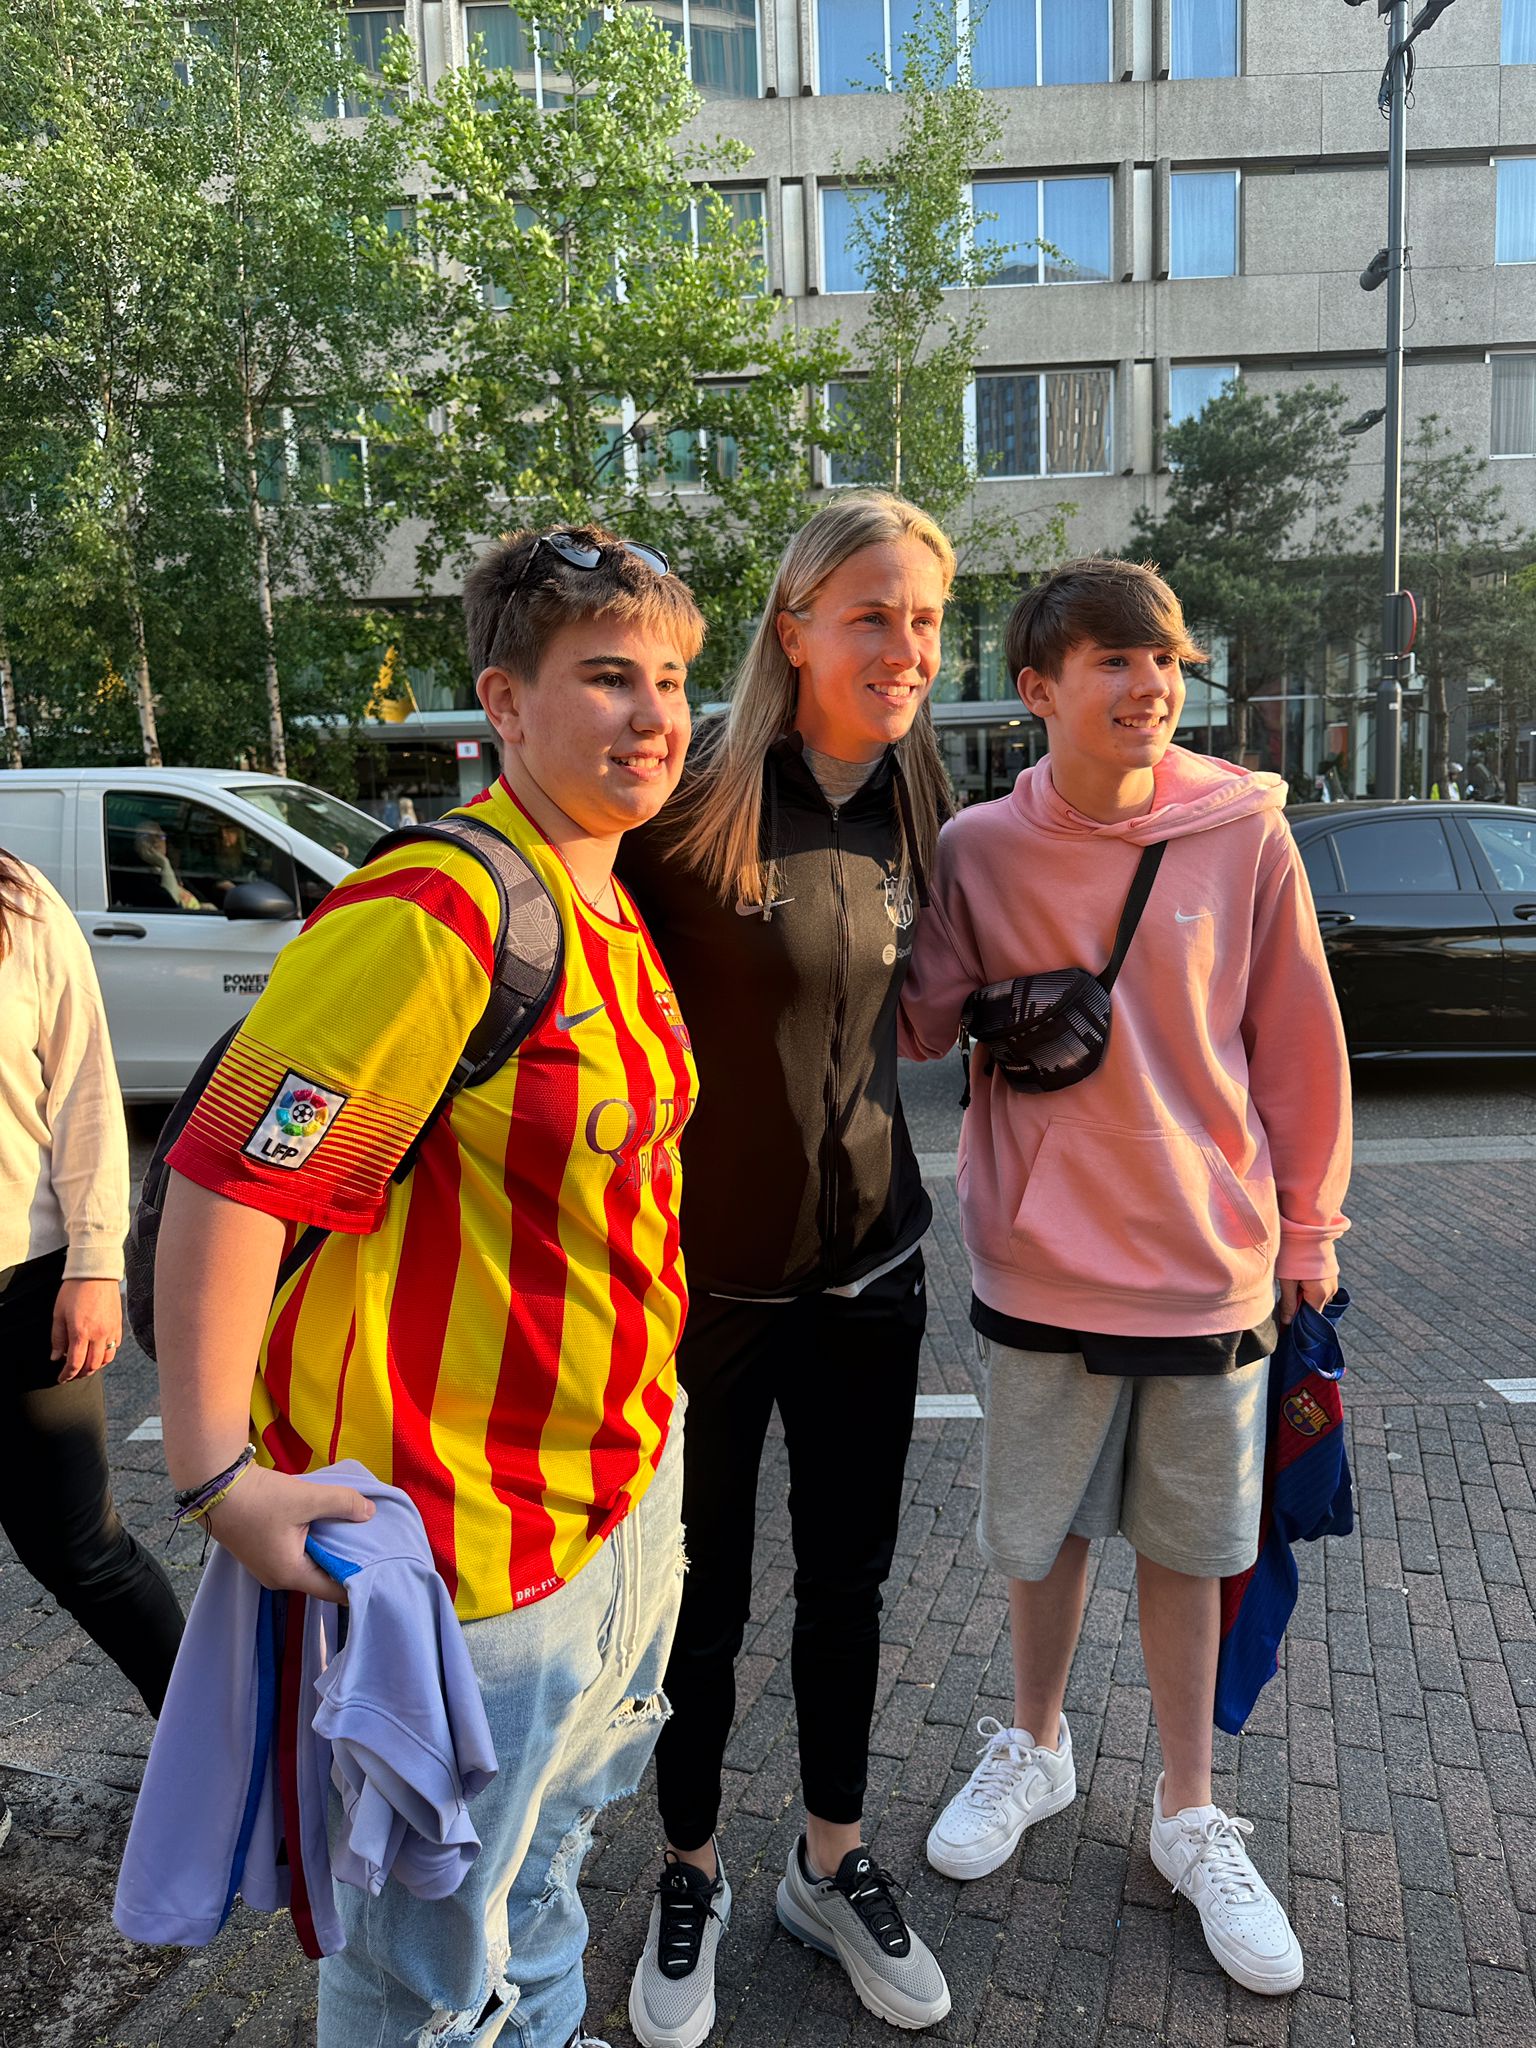 "Som la gent blaugrana": Barça fans journey to Women's Champions final with hopes high | VIDEOS